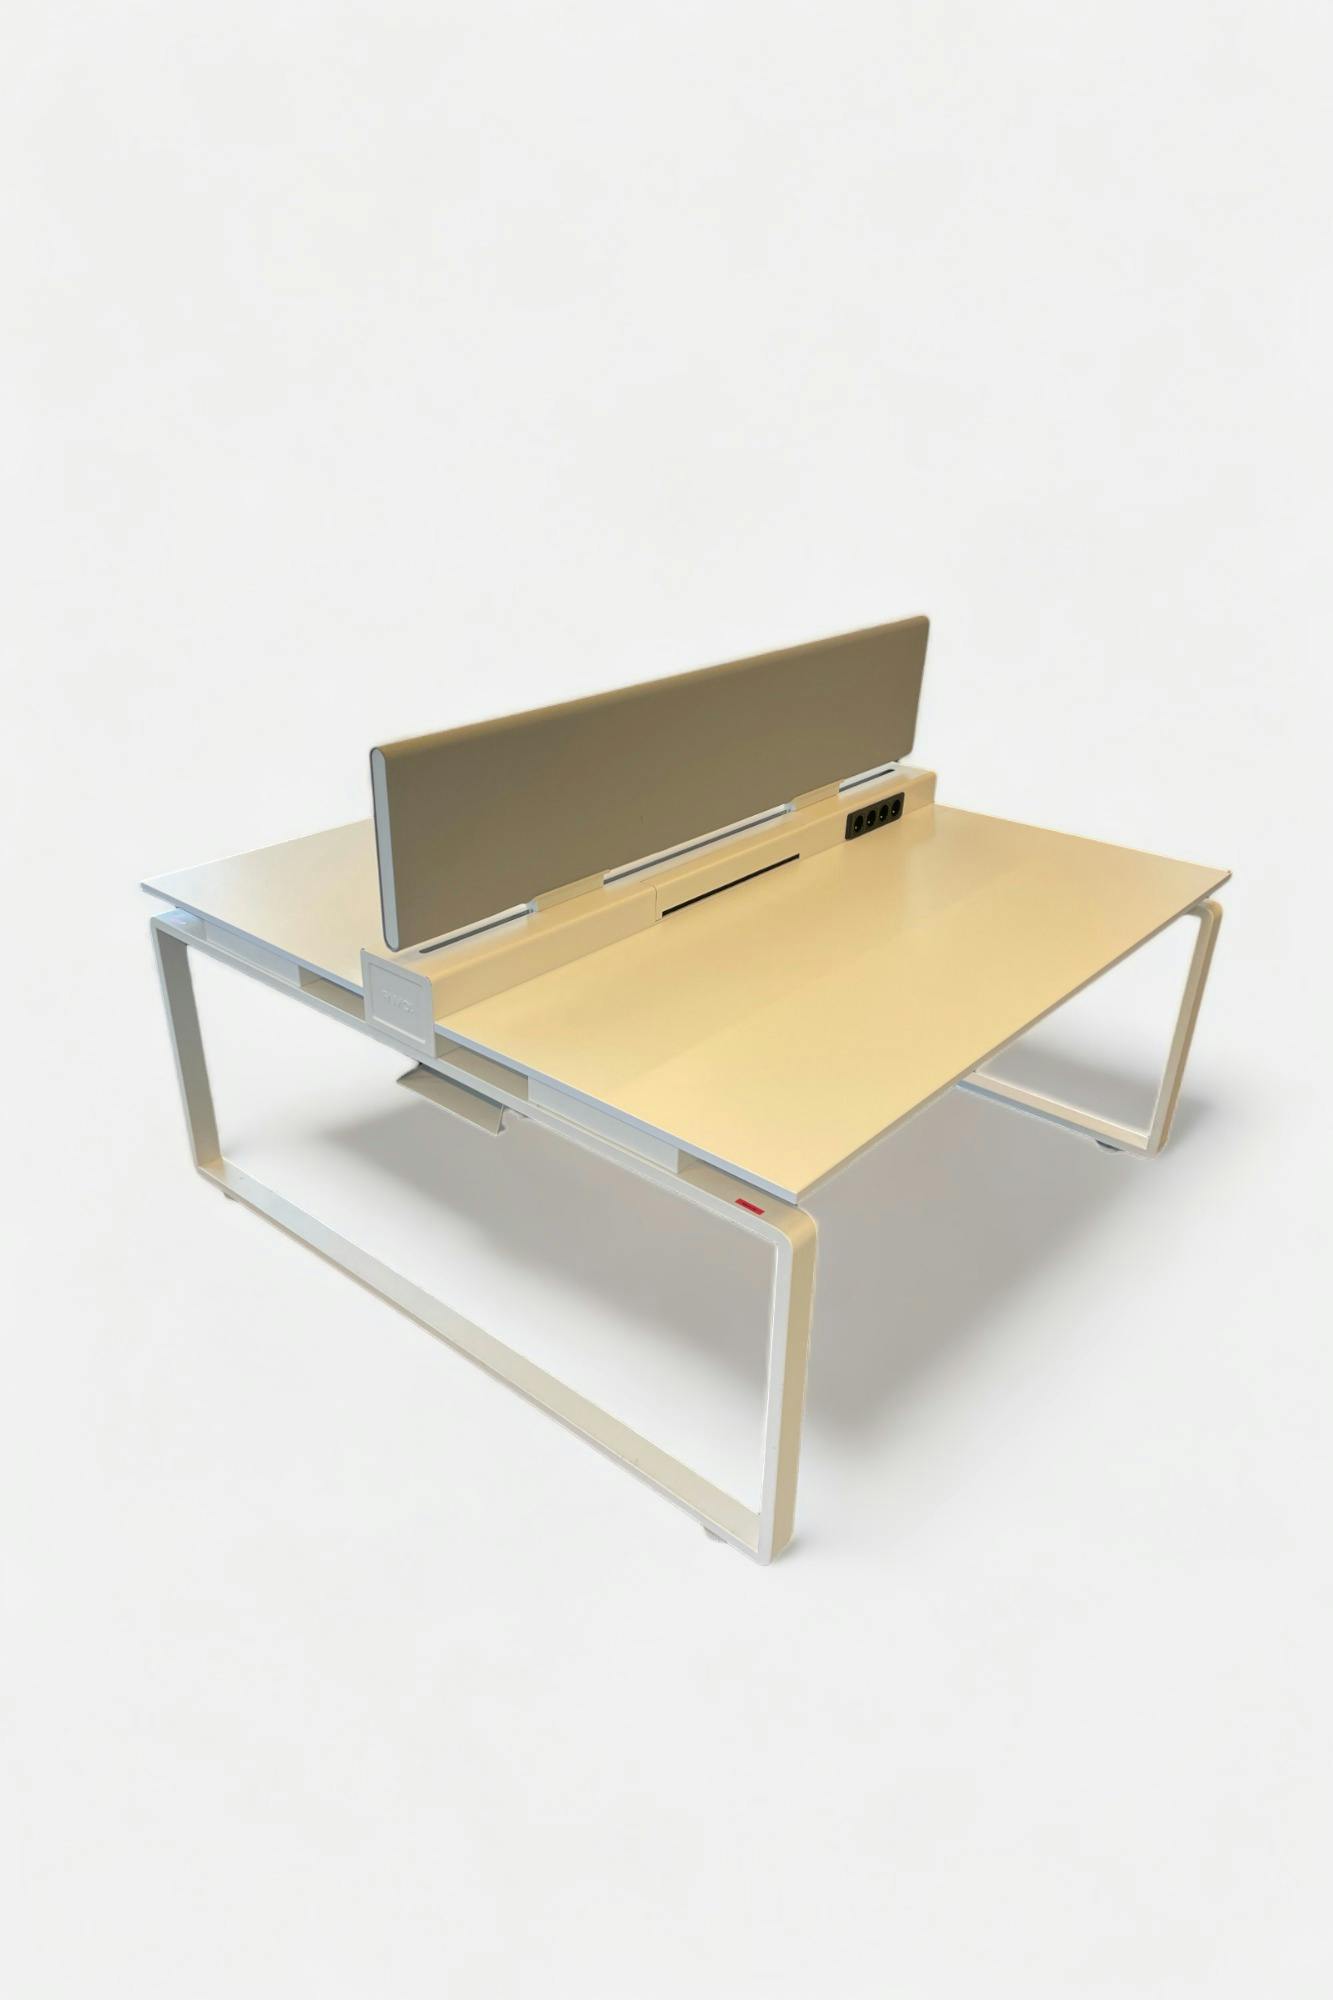 FAMO 160cm white duo wooden bench with white legs and grey separator  - Relieve Furniture